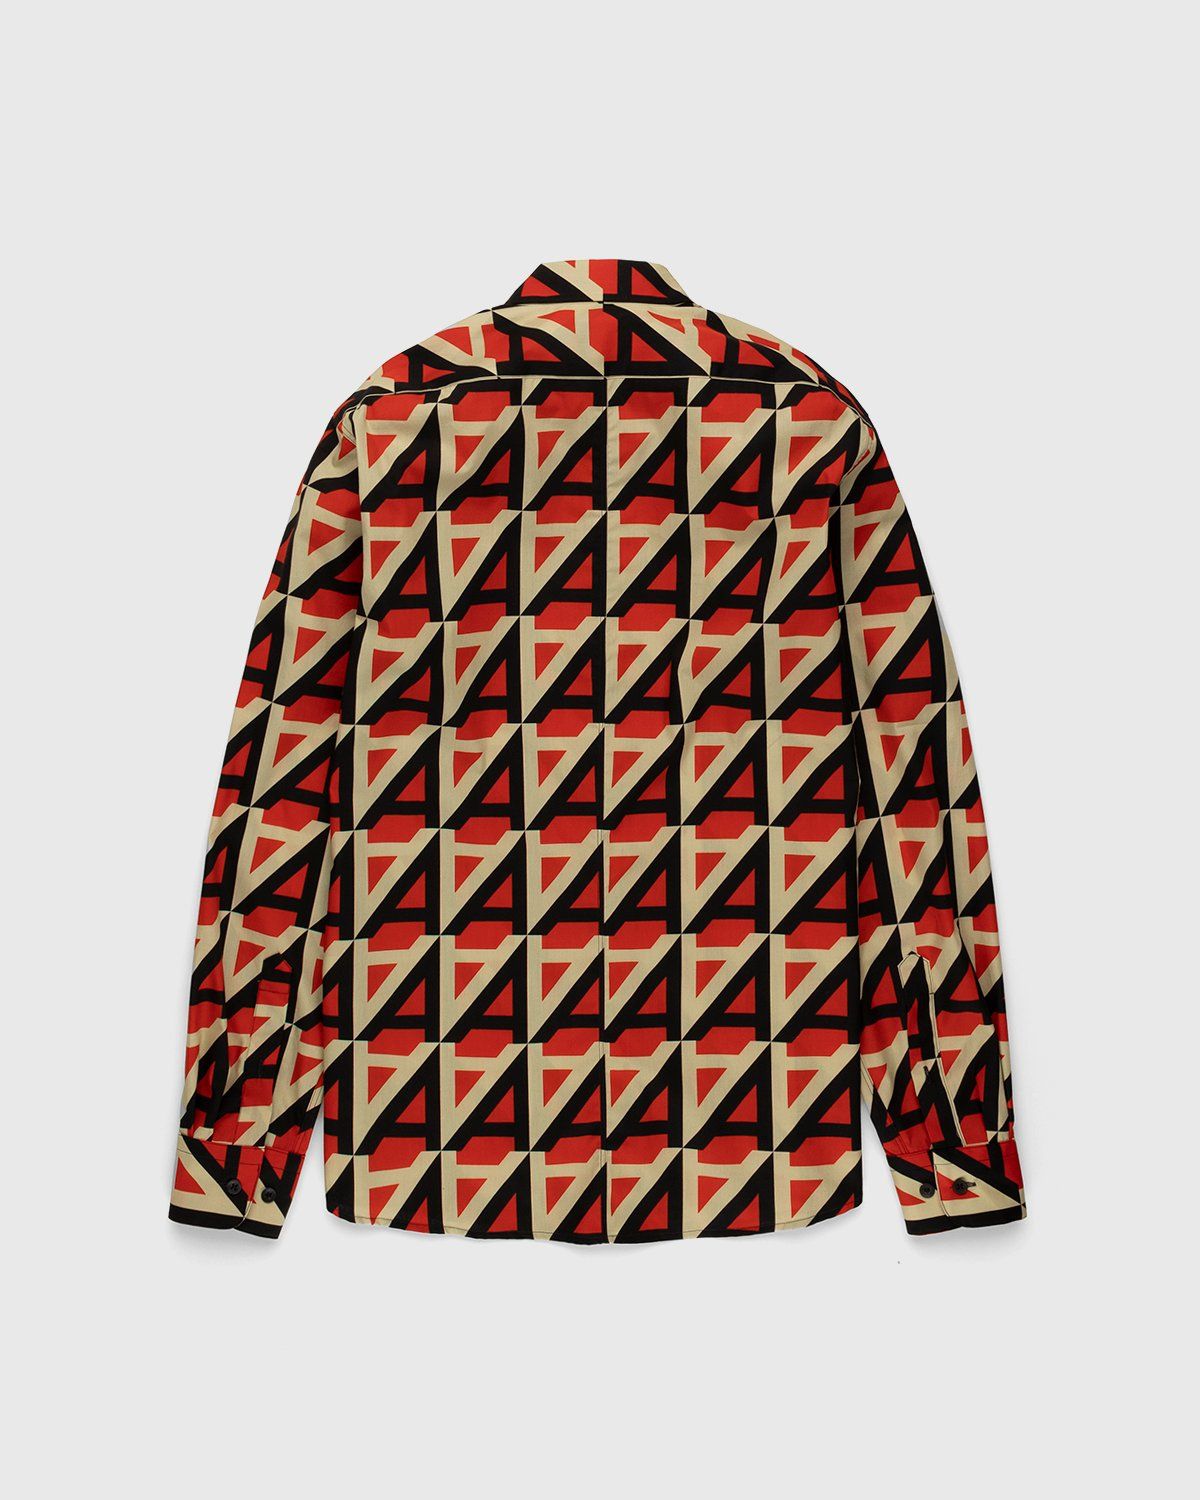 Dries van Noten – Curle "A" Shirt Red - Longsleeve Shirts - Red - Image 2